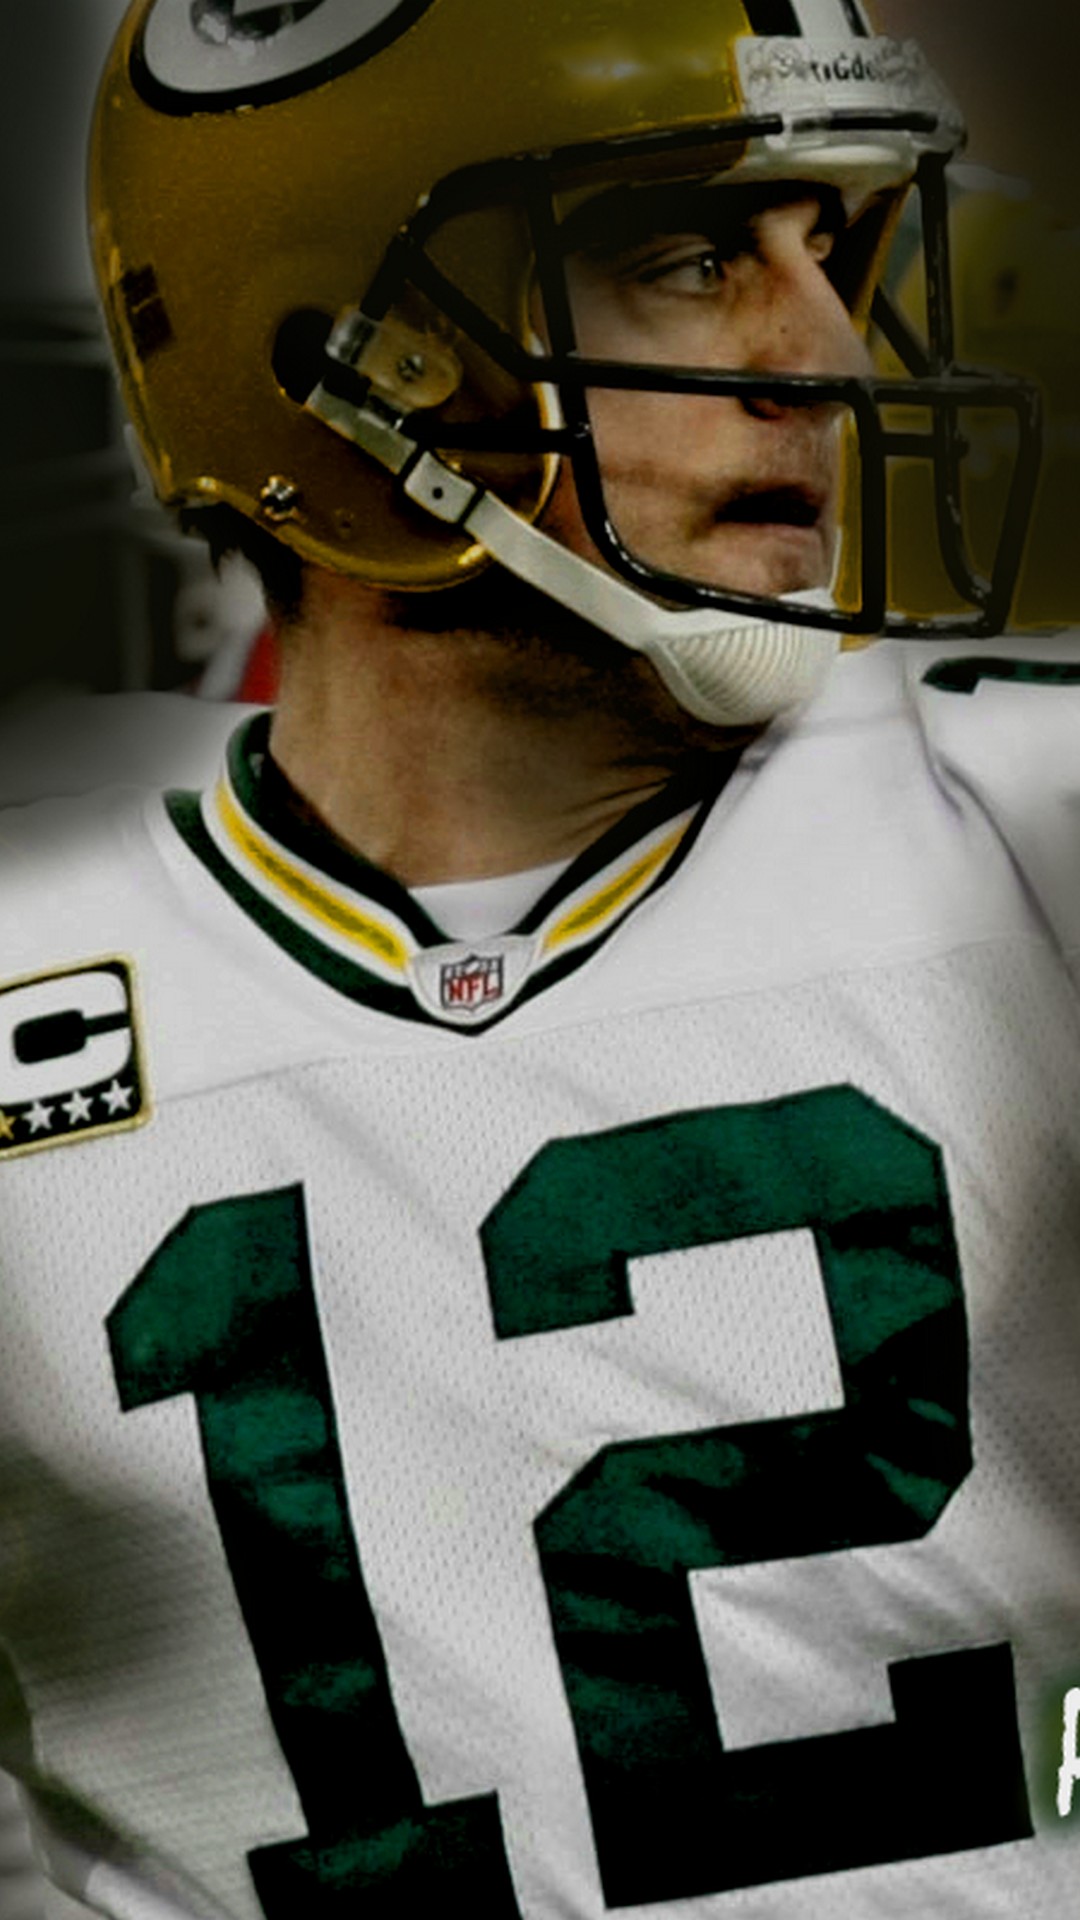 Aaron Rodgers iPhone 8 Wallpaper with high-resolution 1080x1920 pixel. Download and set as wallpaper for Apple iPhone X, XS Max, XR, 8, 7, 6, SE, iPad, Android